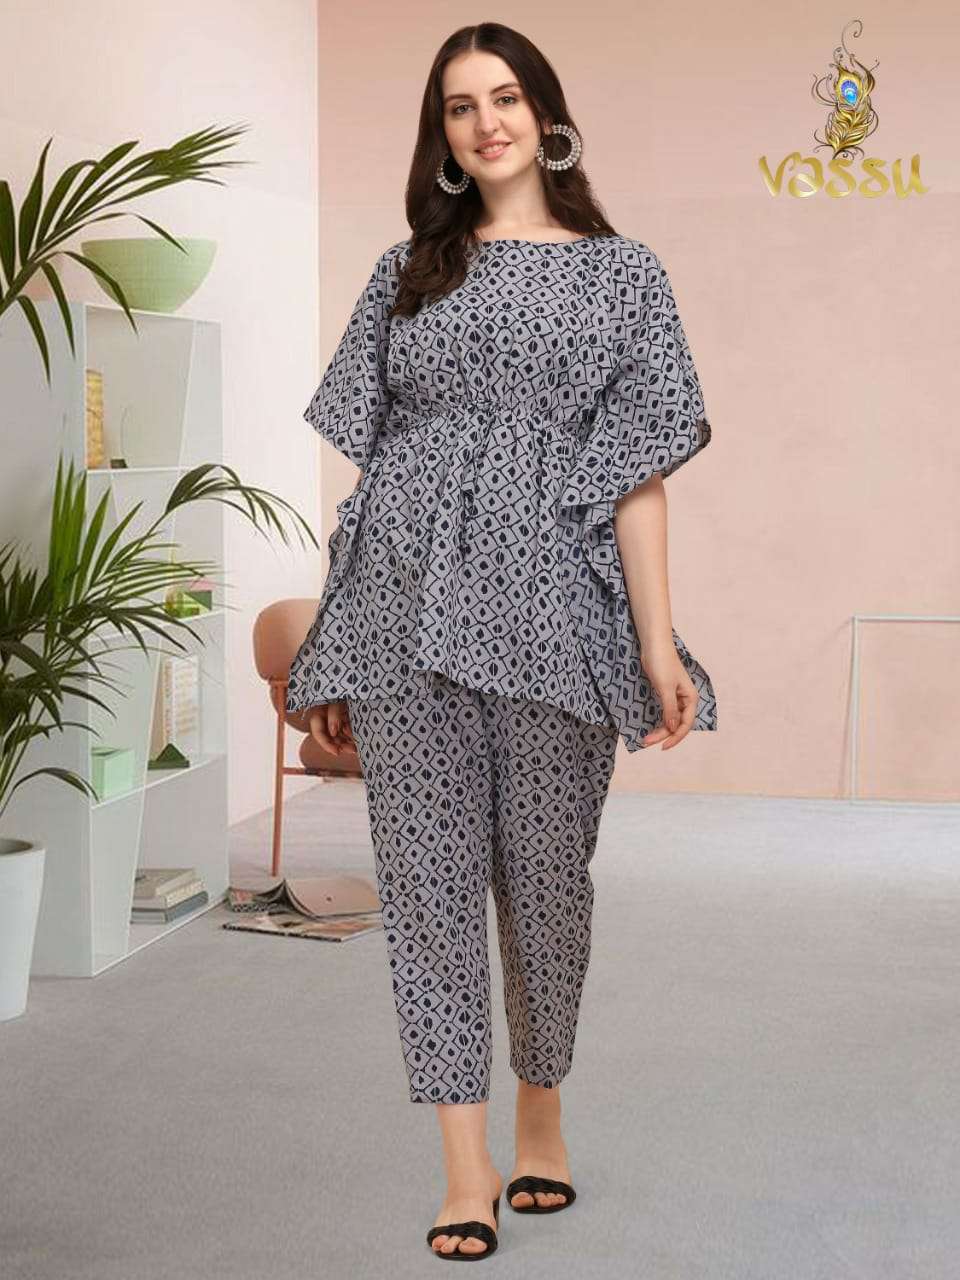 KAFTAN FASHION VOL-1 BY VASSU 01 TO 05 SERIES DESIGNER WEAR COLLECTION BEAUTIFUL STYLISH FANCY COLORFUL PARTY WEAR & OCCASIONAL WEAR COTTON KAFTAN WITH BOTTOM AT WHOLESALE PRICE